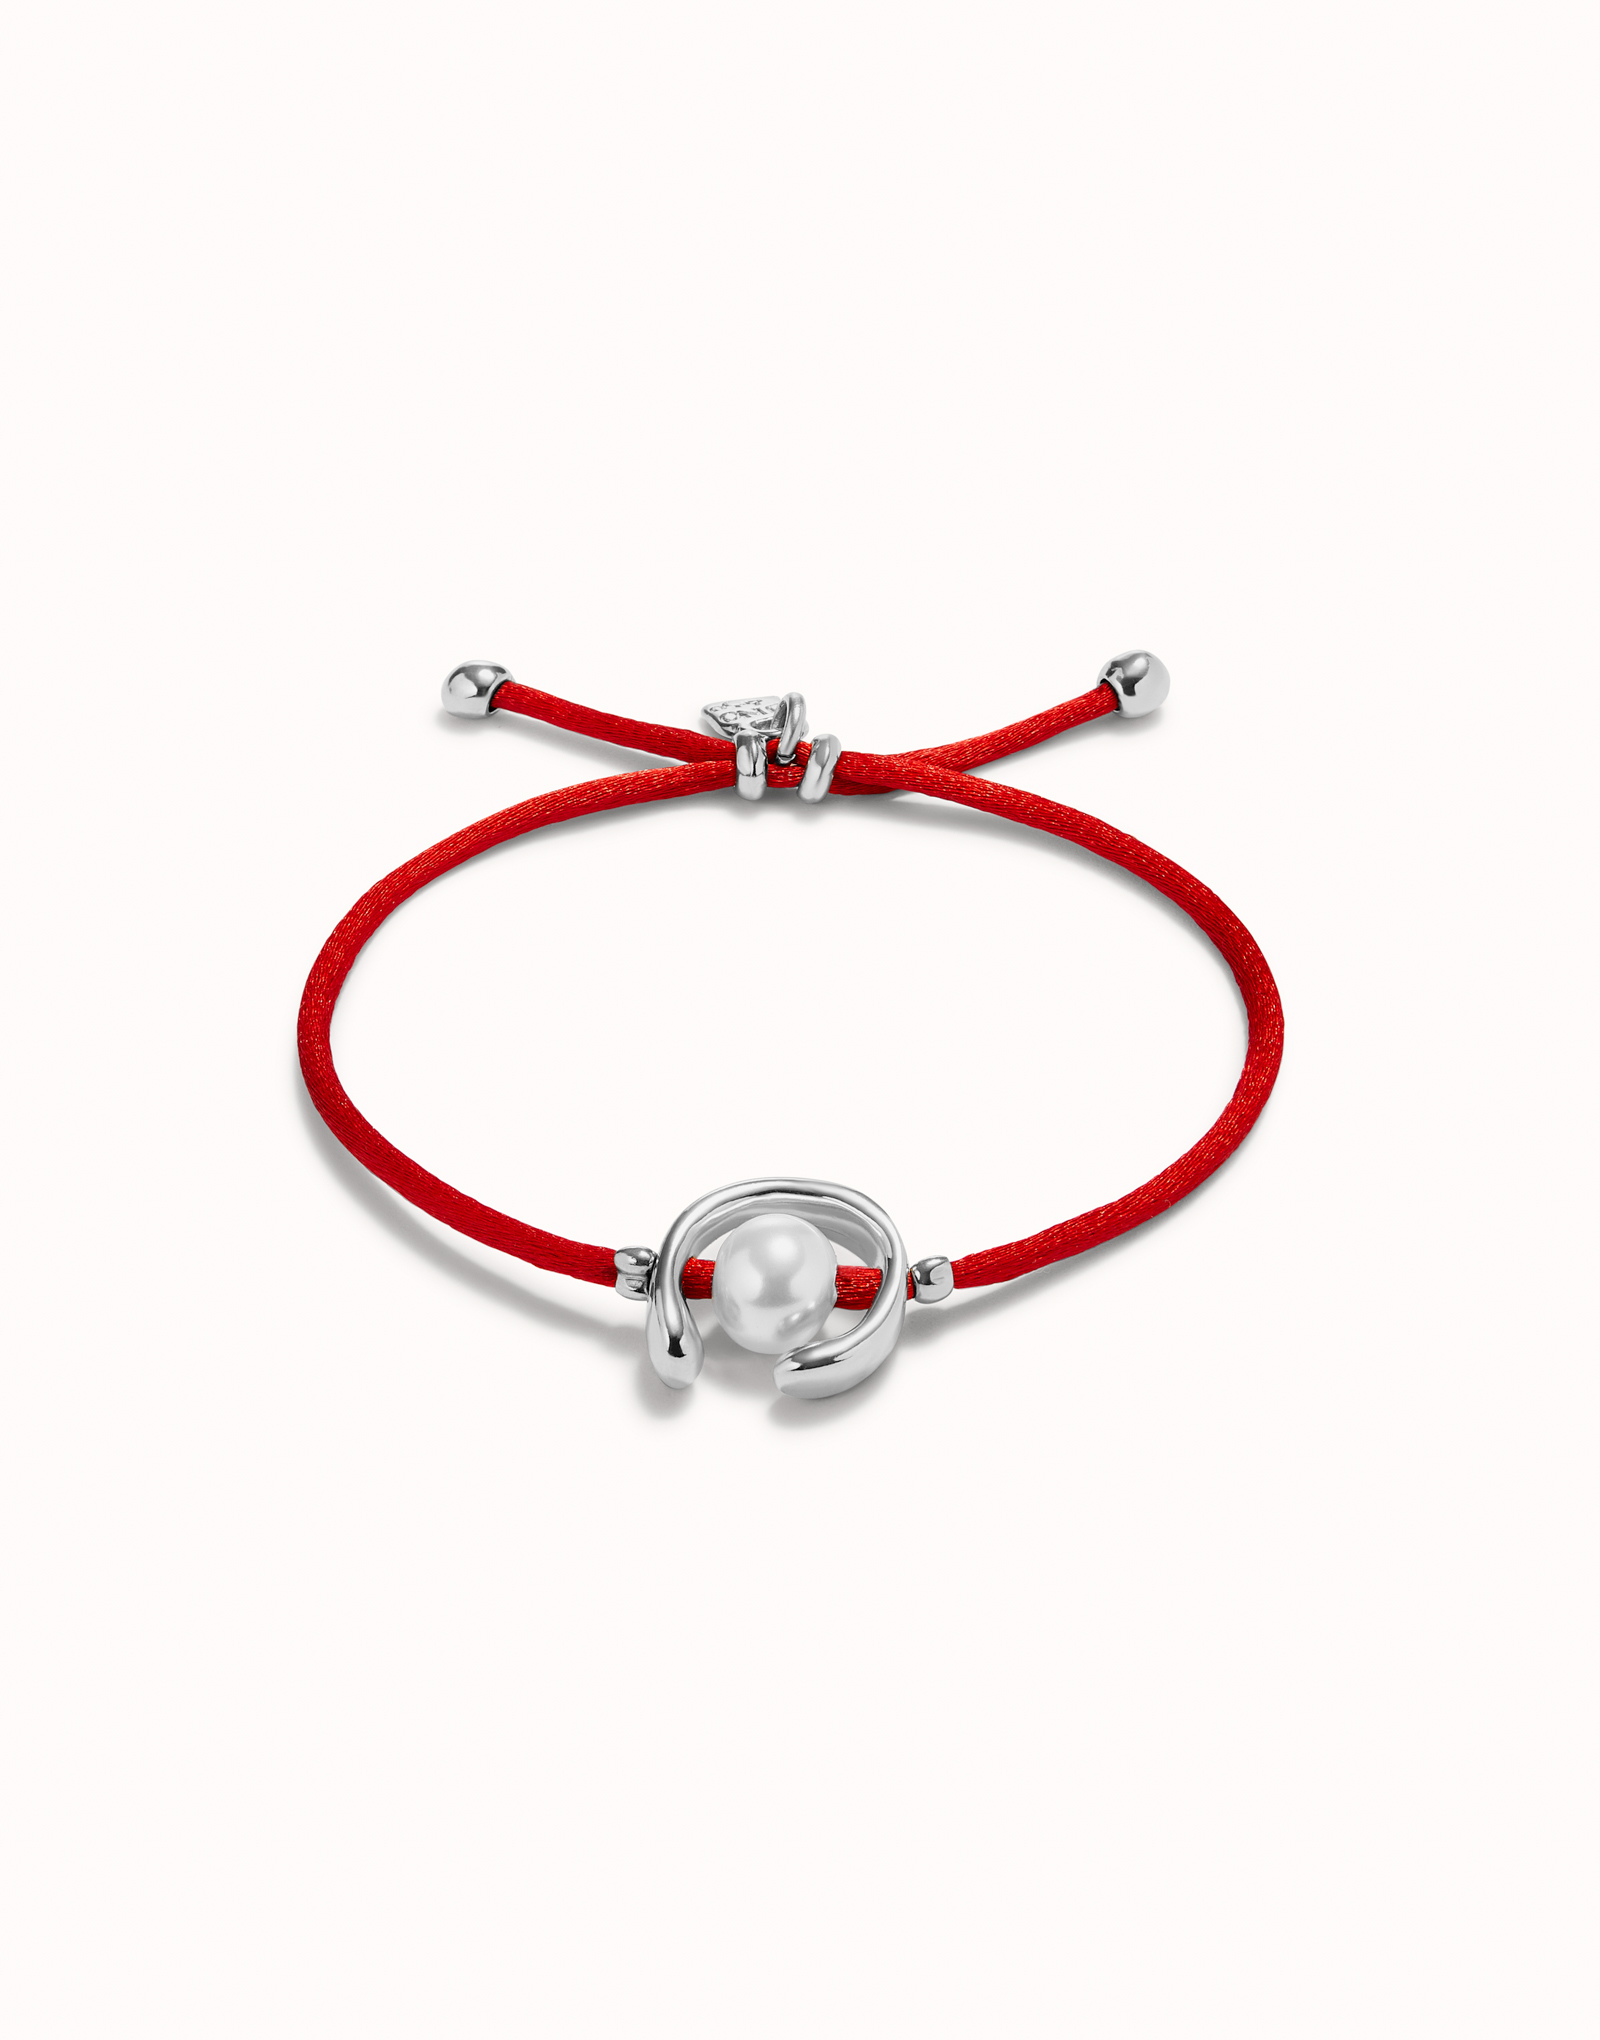 Bracciale in filo rosso con perla shell assortimento placcato argento Sterling., Argent, large image number null